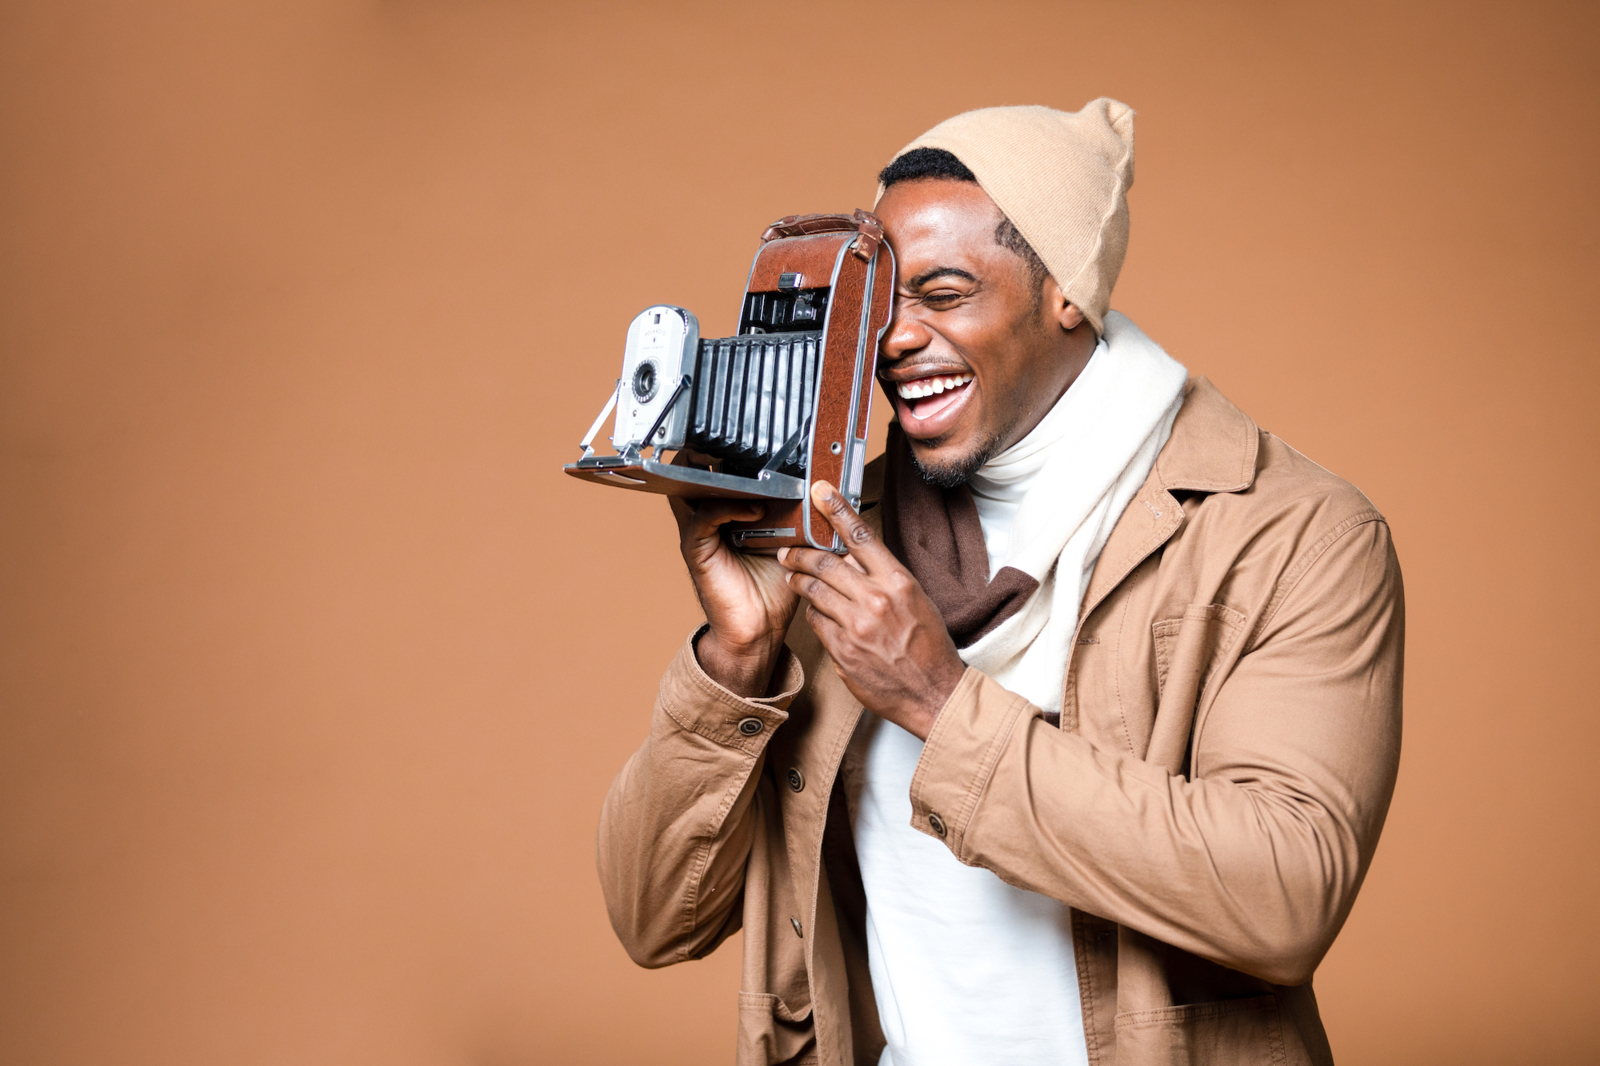 Amazon Product Video Side profile of man wearing a beige jacket and knit cap using a vintage camera smiling